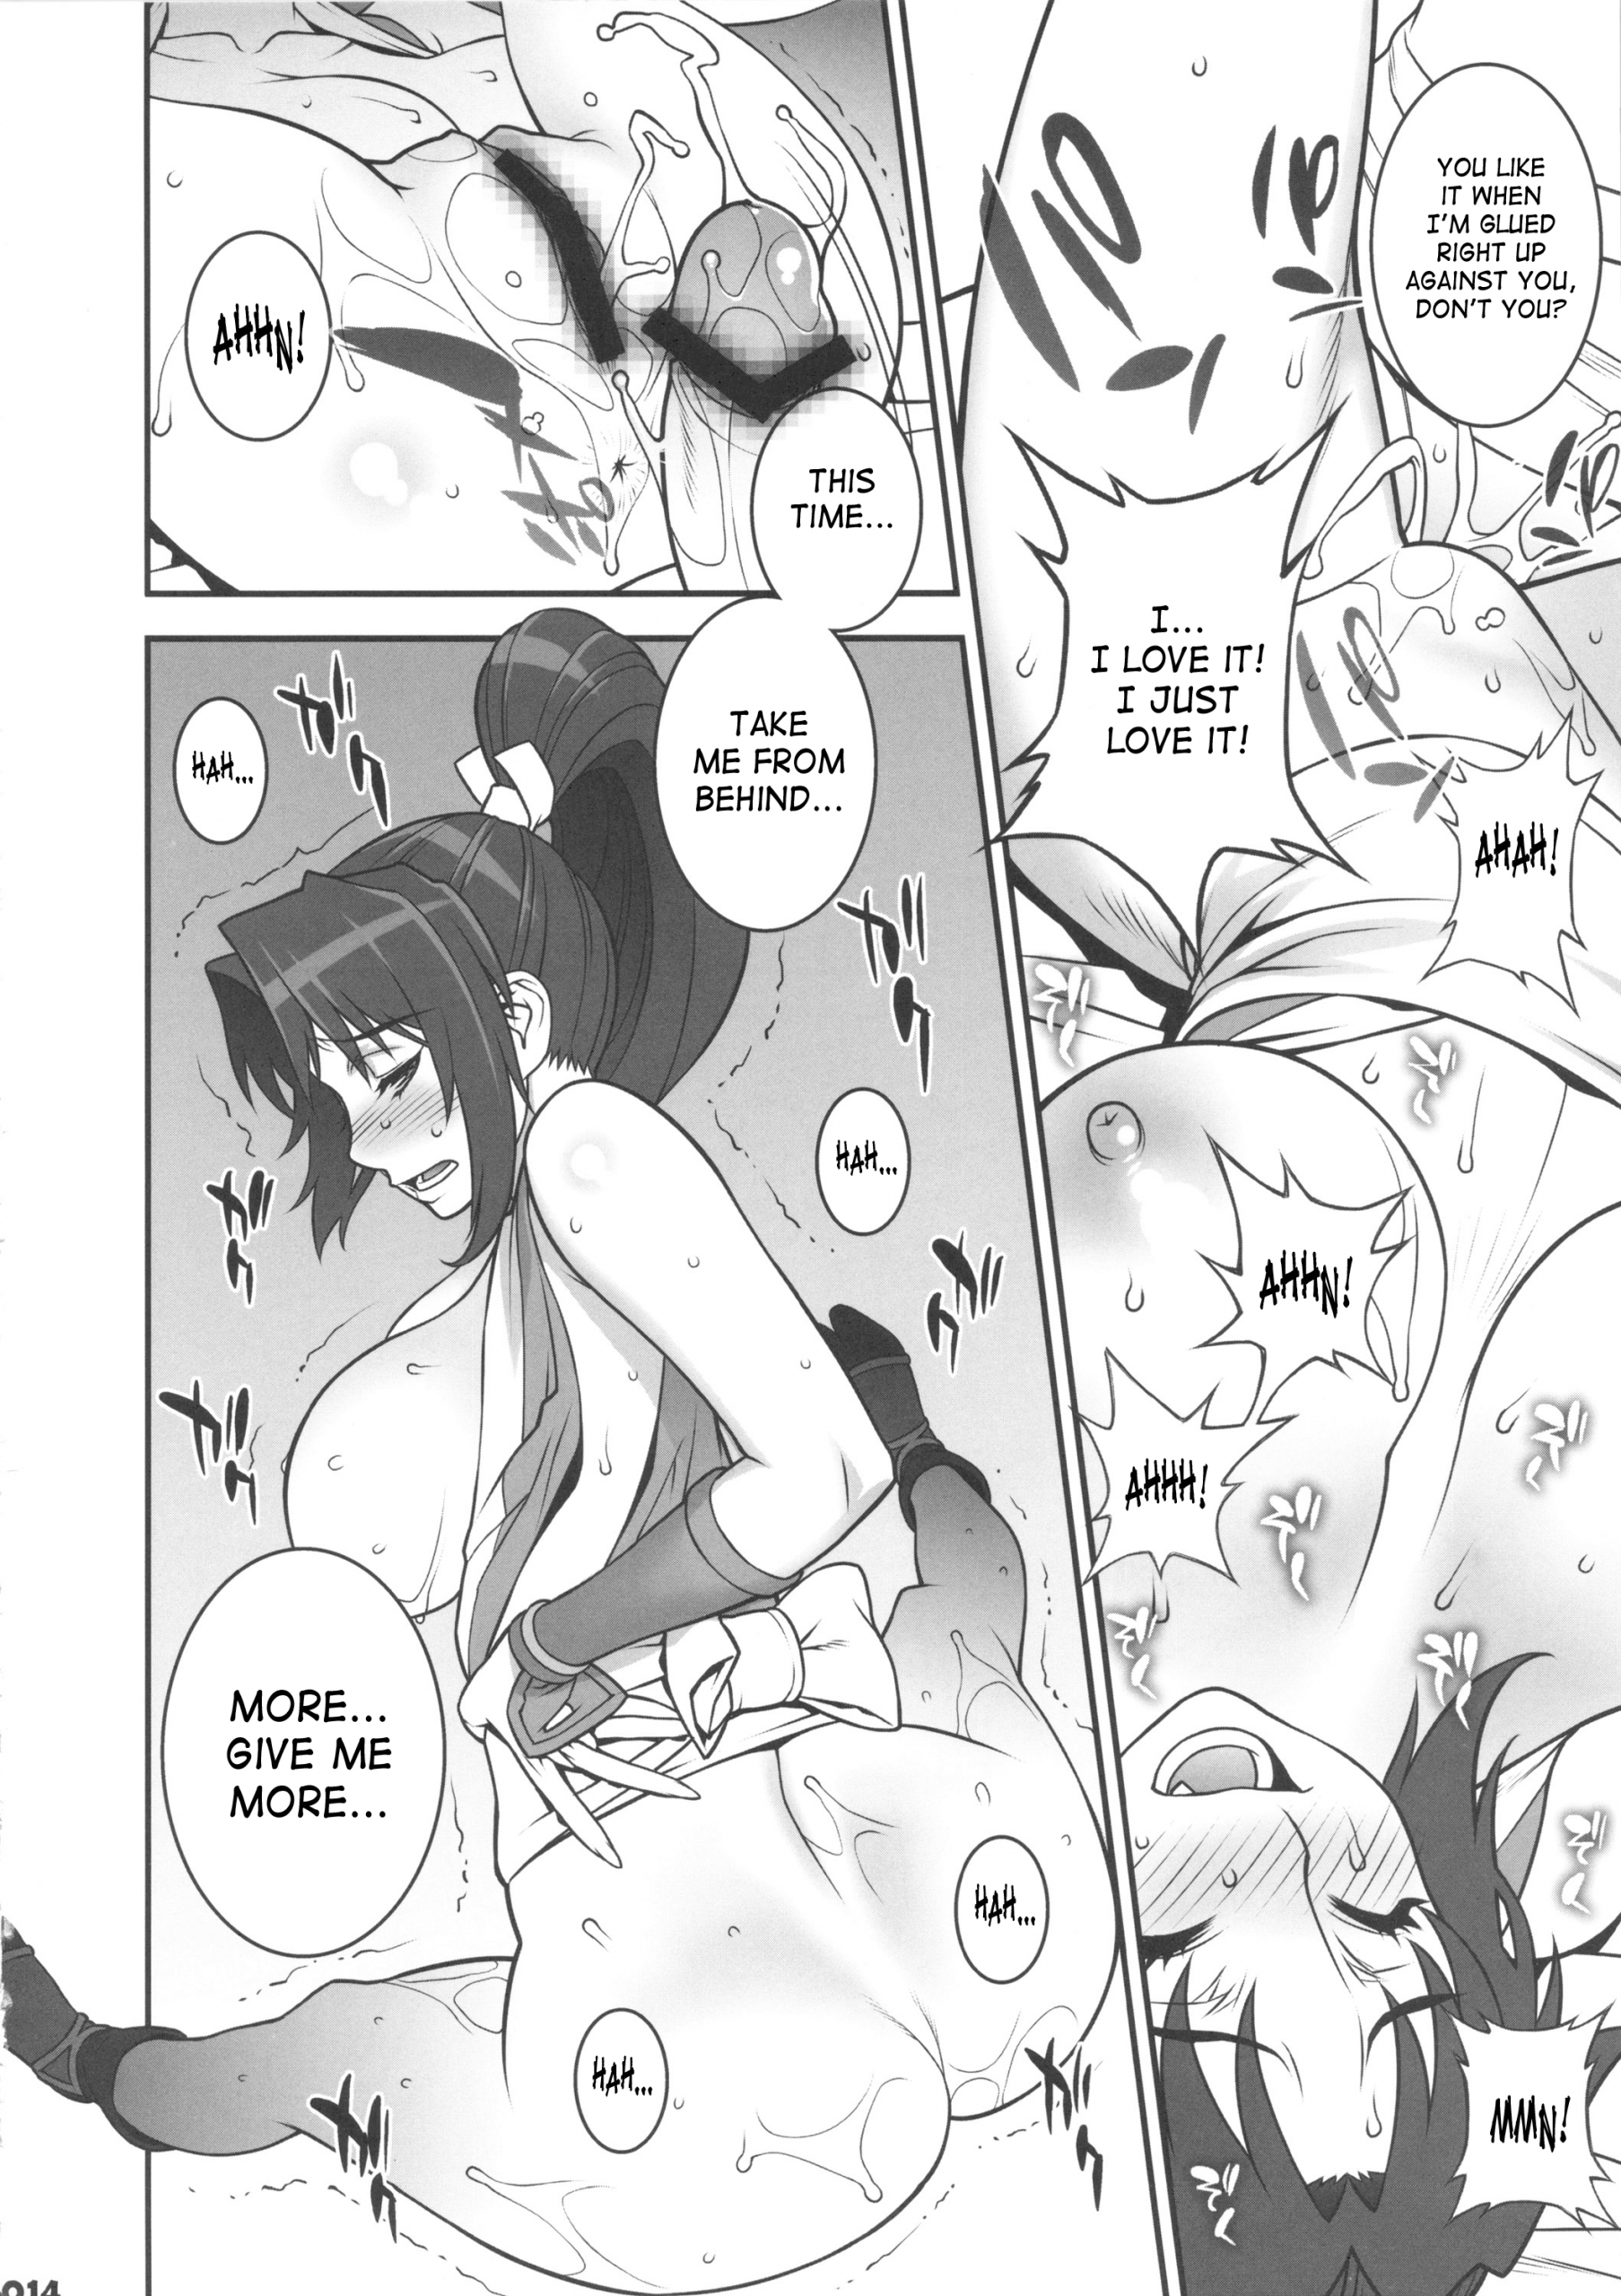 Let's Have Sex With Nee-san! hentai manga picture 11